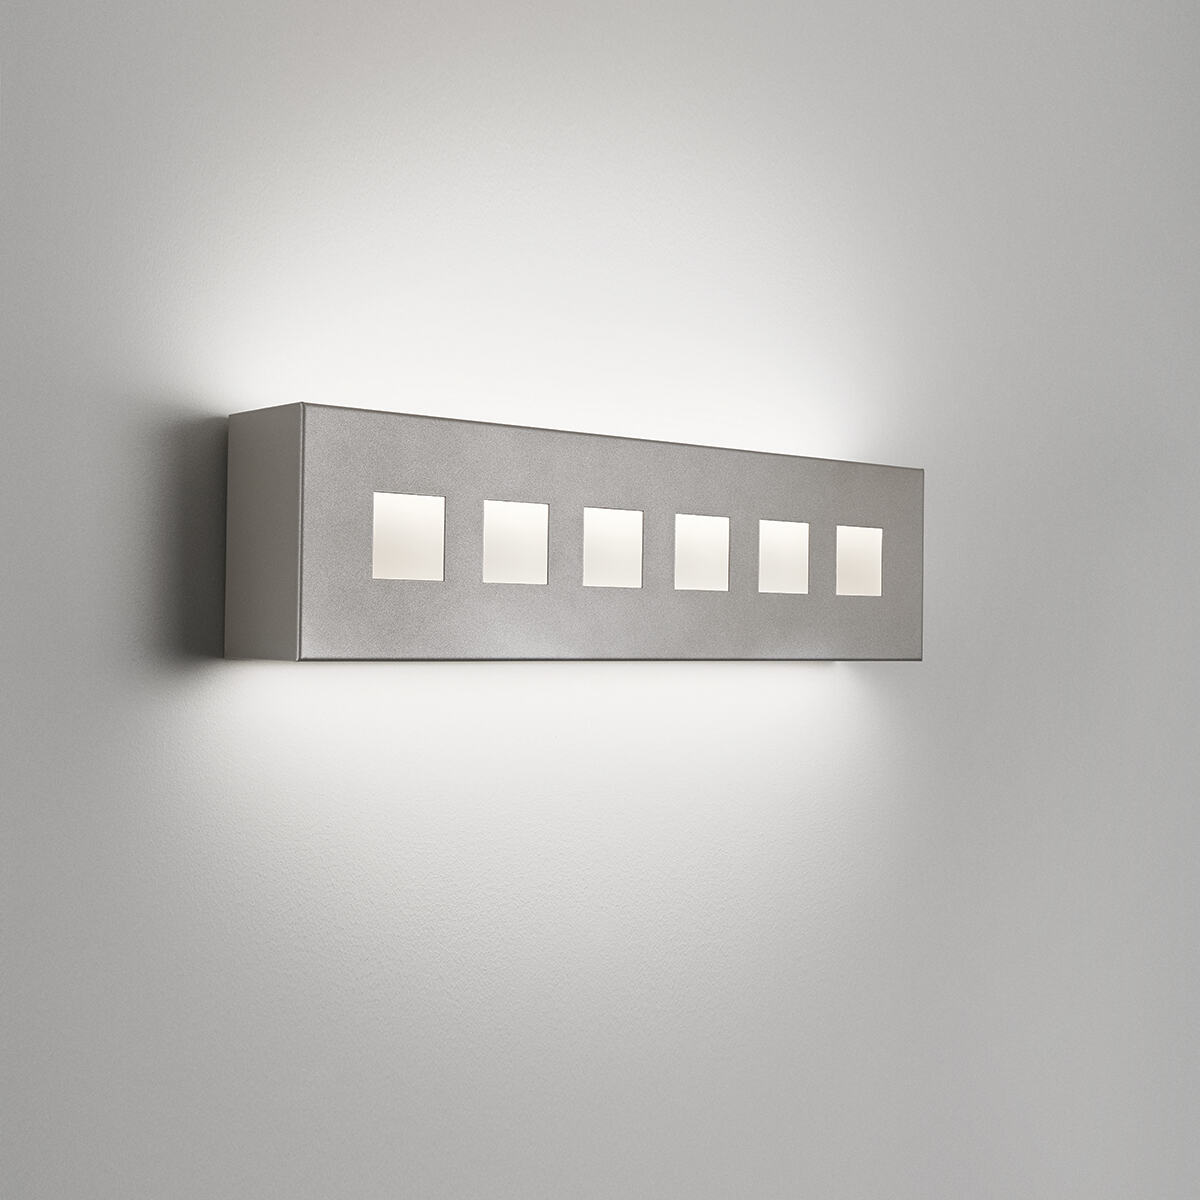 A box-like linear wall sonce with uplight and downlight with decorative windows